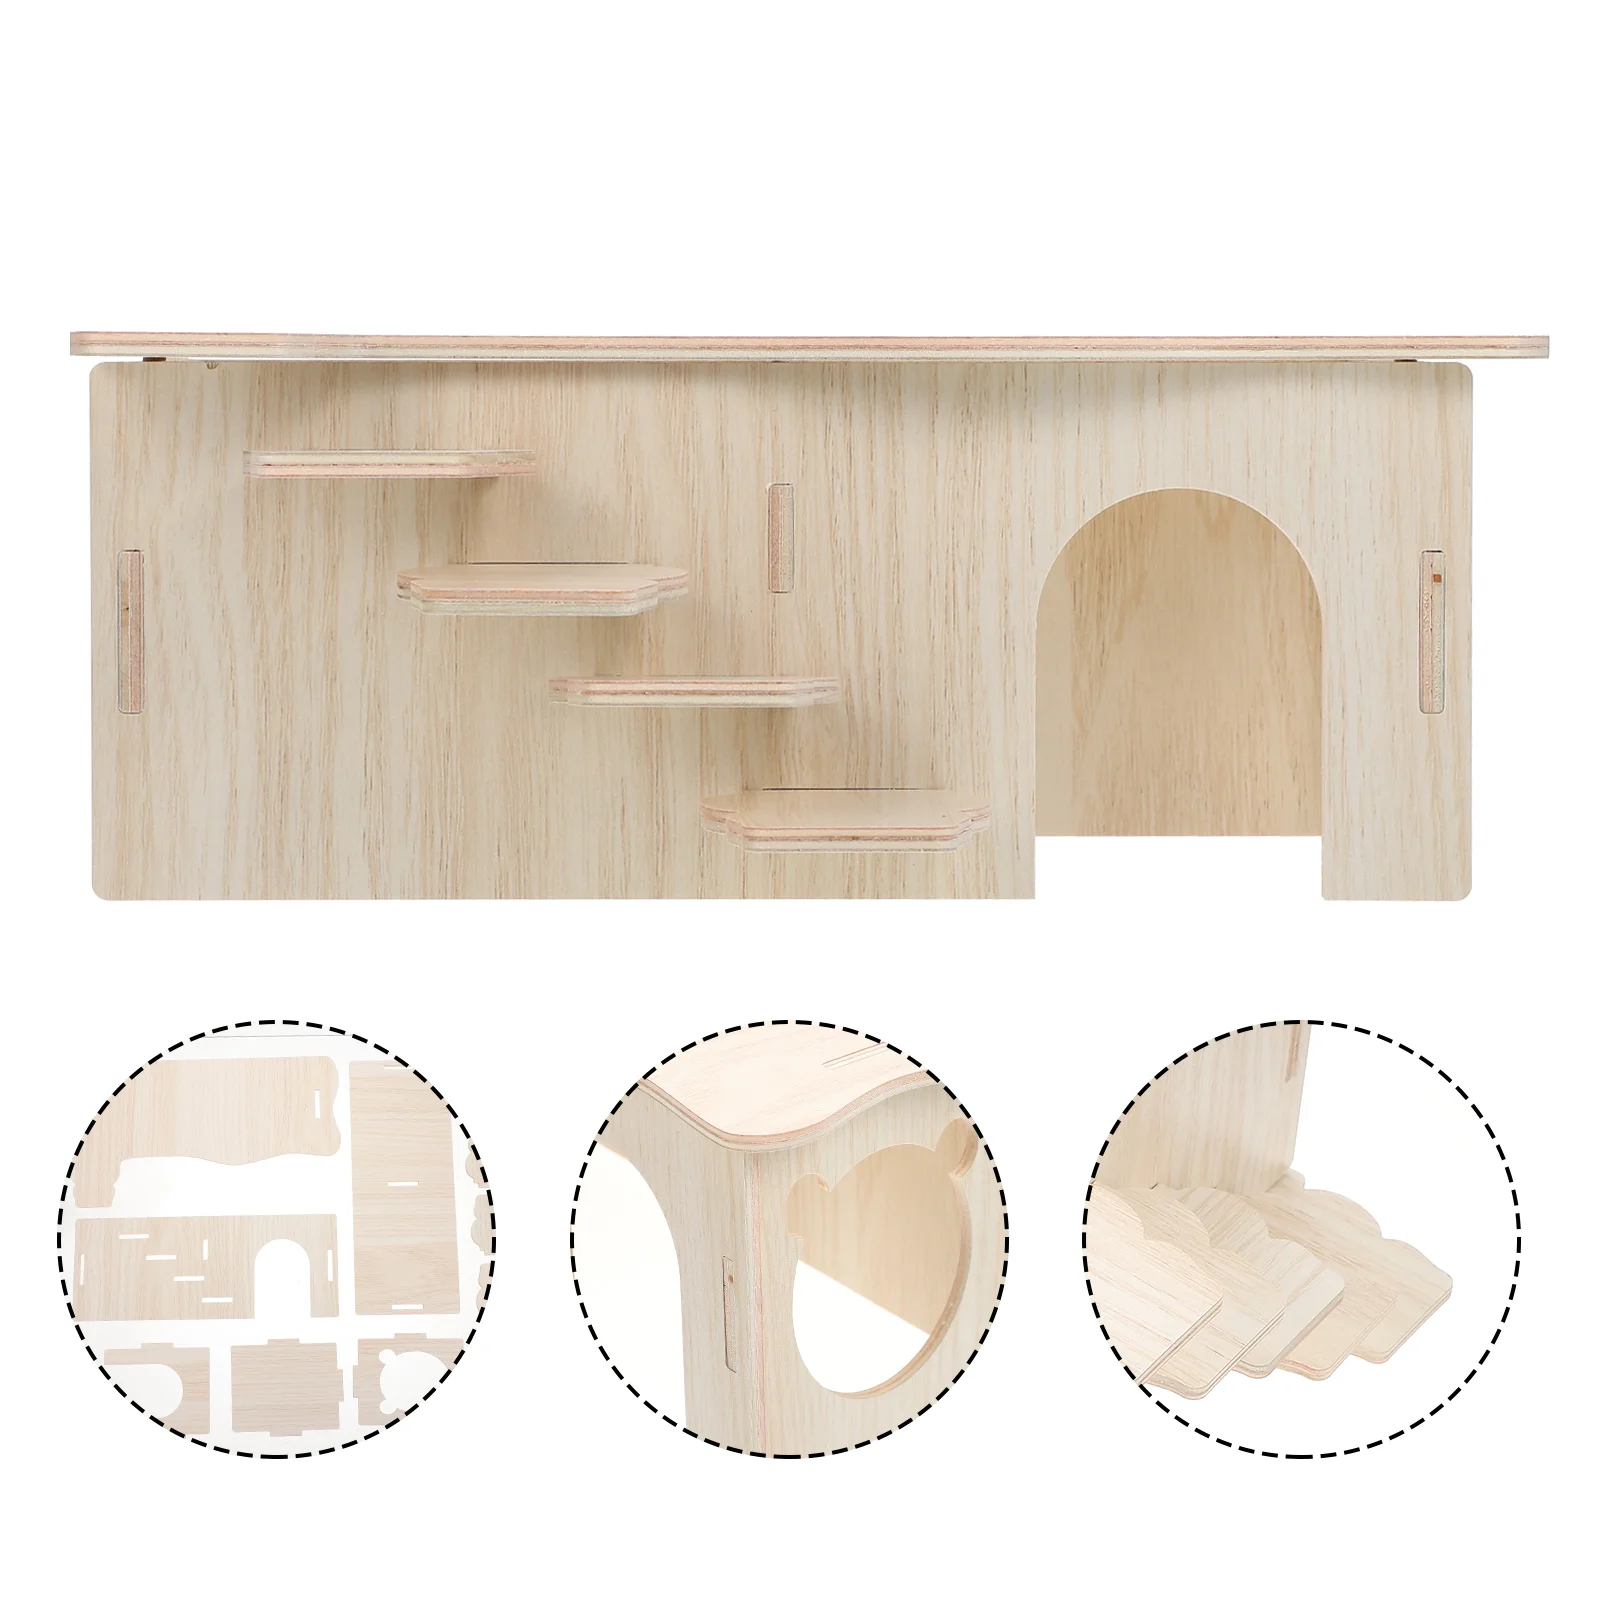 

Hamster Wooden Hideout Houseanimal Climbing Rat Chinchilla Wood Toy Ladder Toyswoodland Hide Castle Pets Playground Hideaway